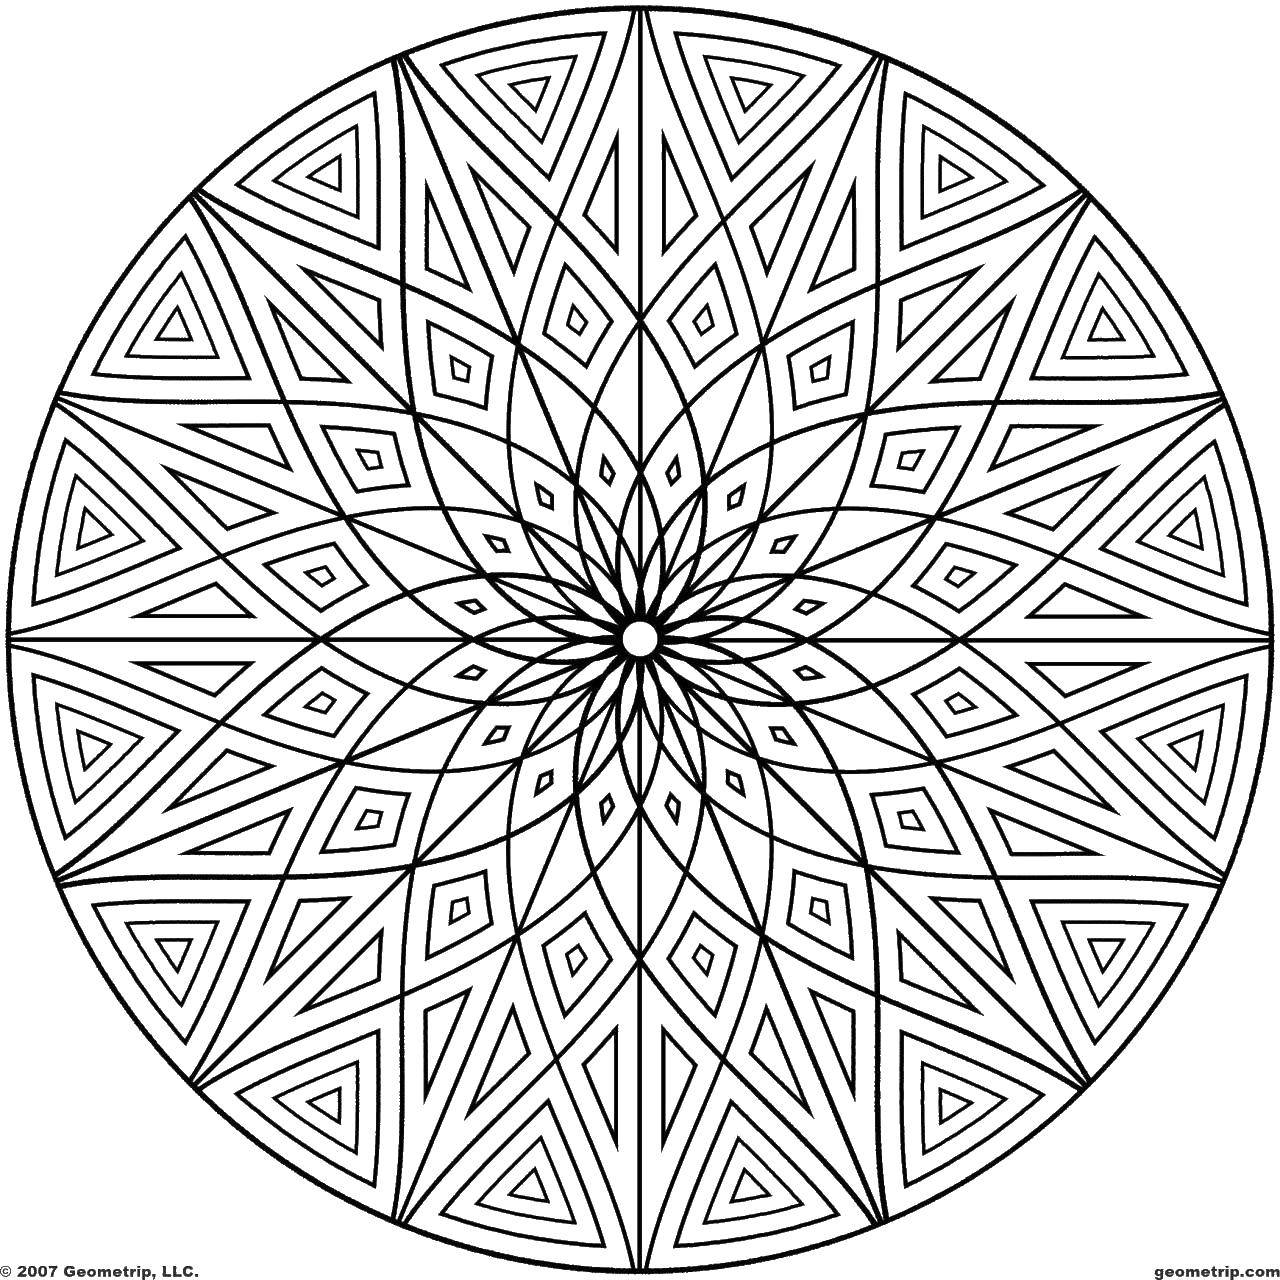 Coloring Geometric patterns in the circle.. Category Patterns with flowers. Tags:  Patterns, flower.